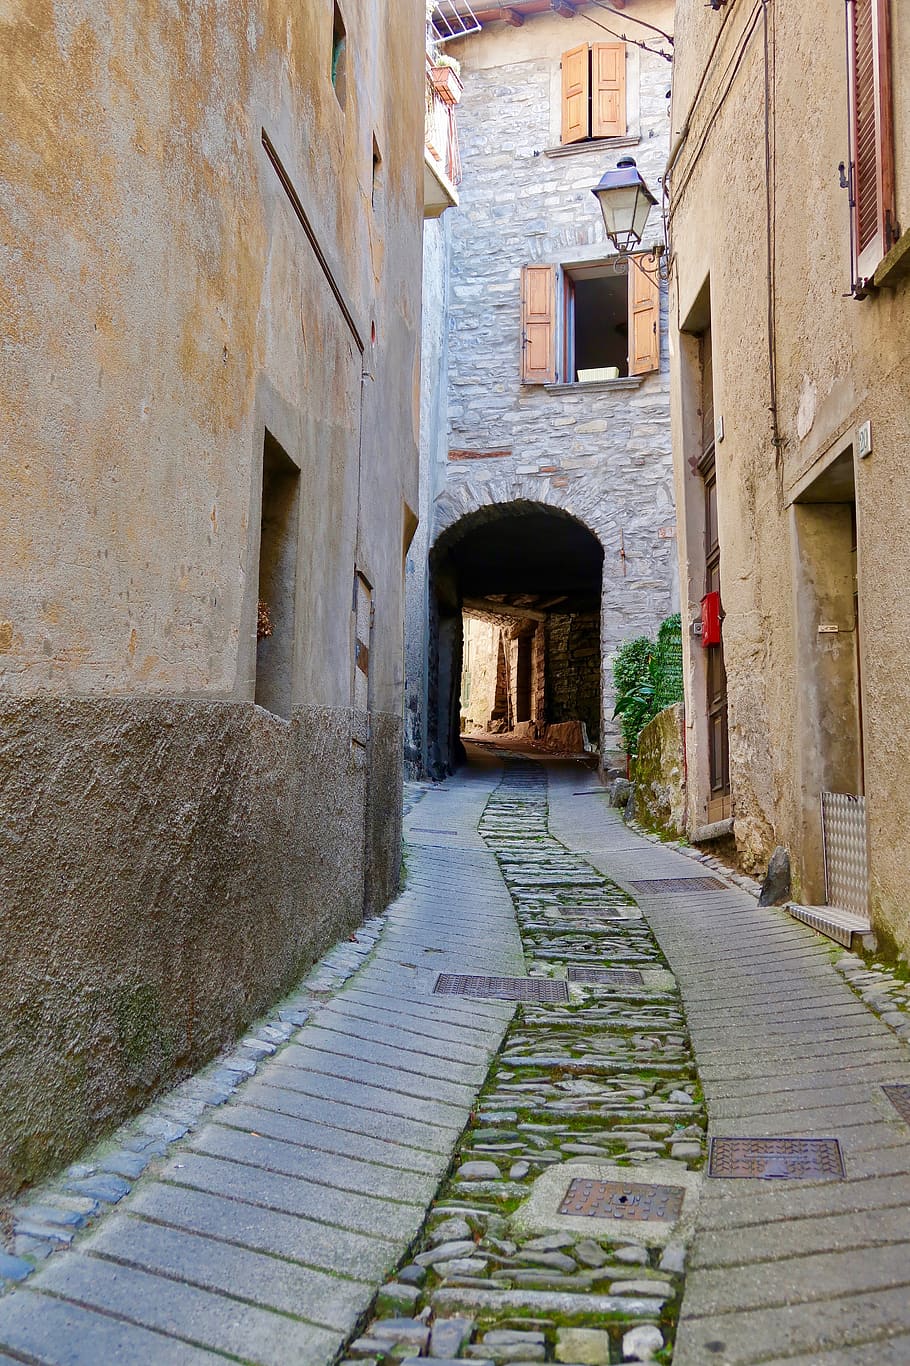 italy, village, alley, architecture, bergdorf, tourism, mountains, travel, building, houses